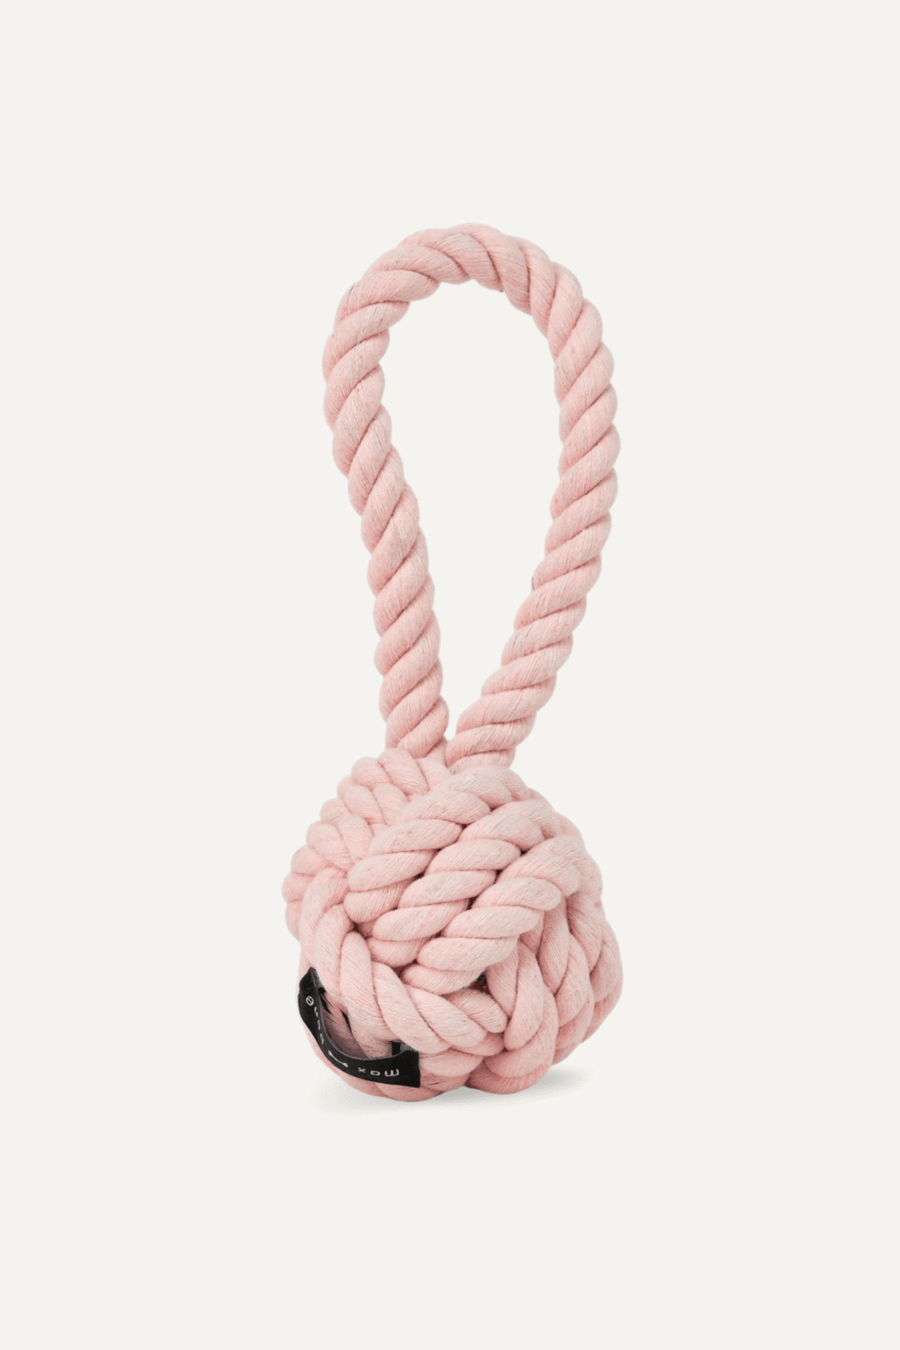 MAXBONE Large Twisted Rope Ball in Pink, Blue, Lavender & Mint